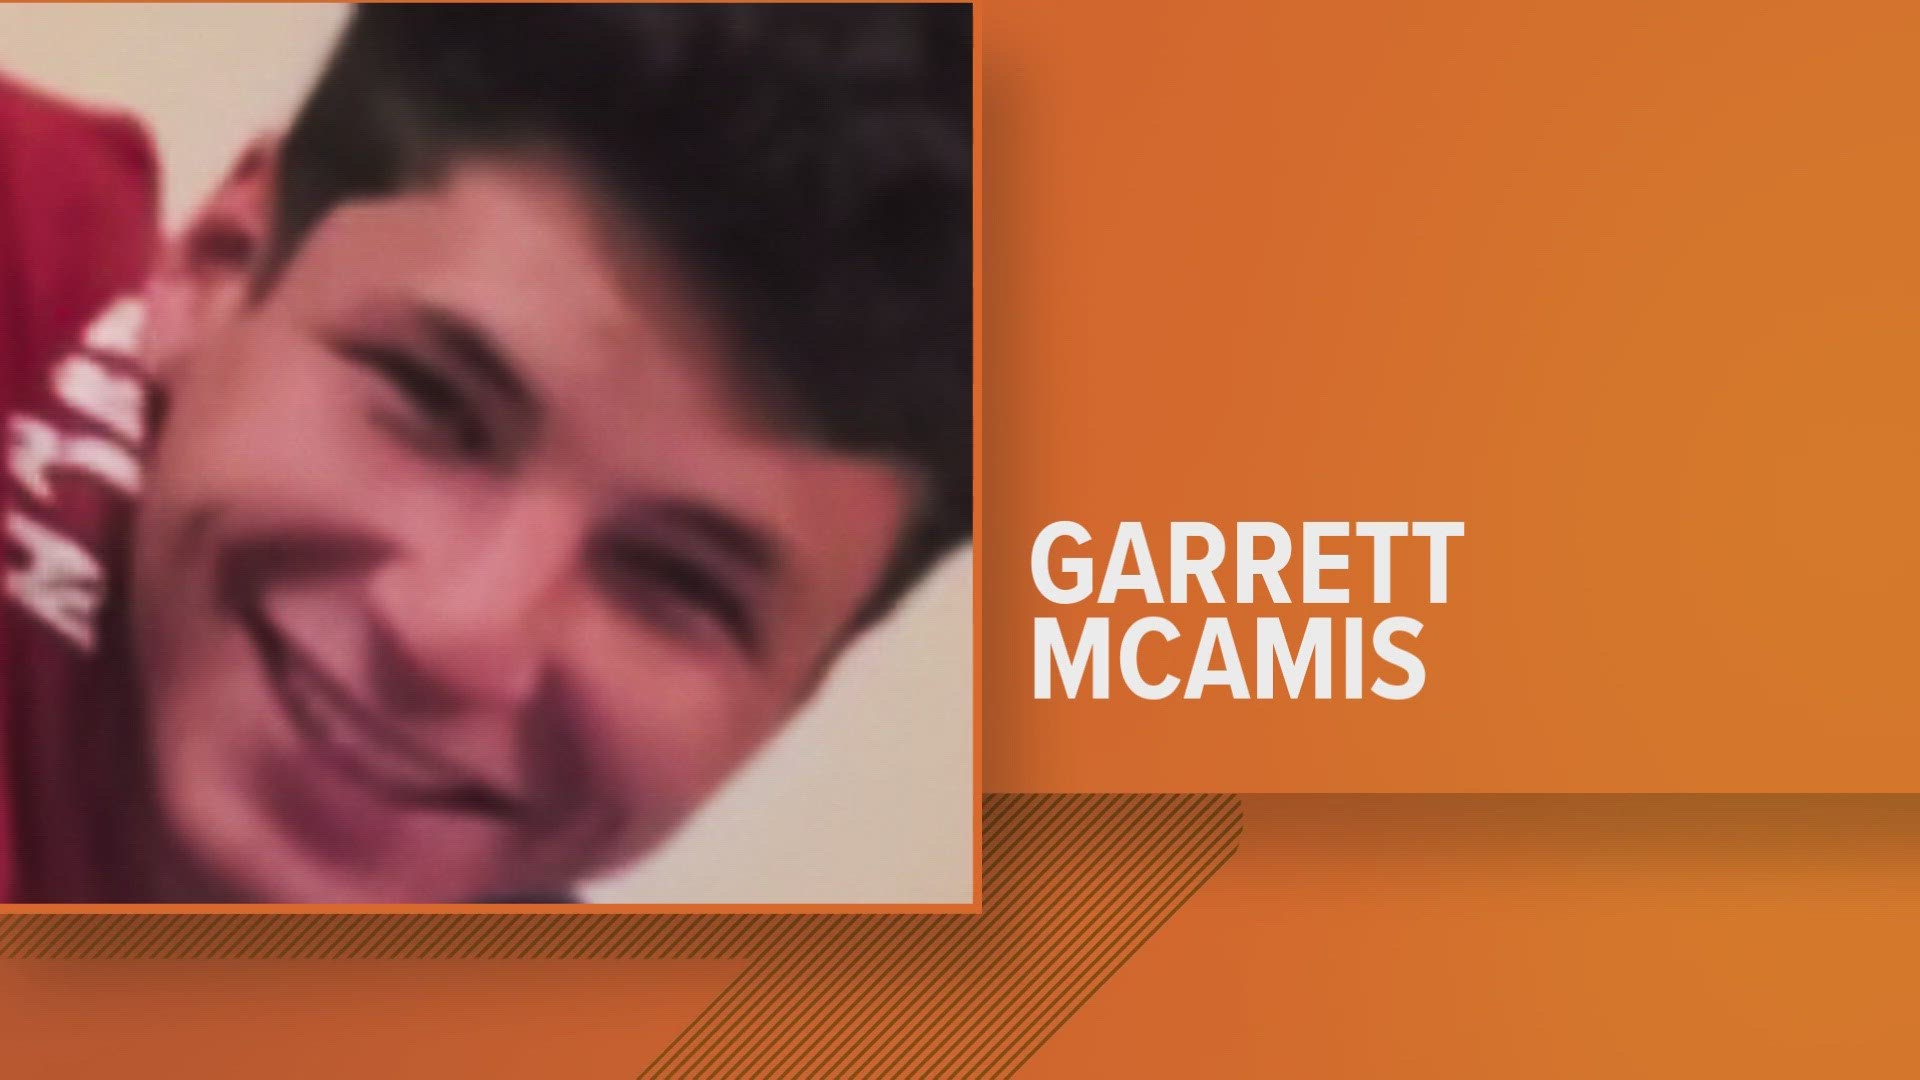 Garrett McAmis was last heard from on Friday, Oct. 13, according to the Blount County Sheriff's Office.